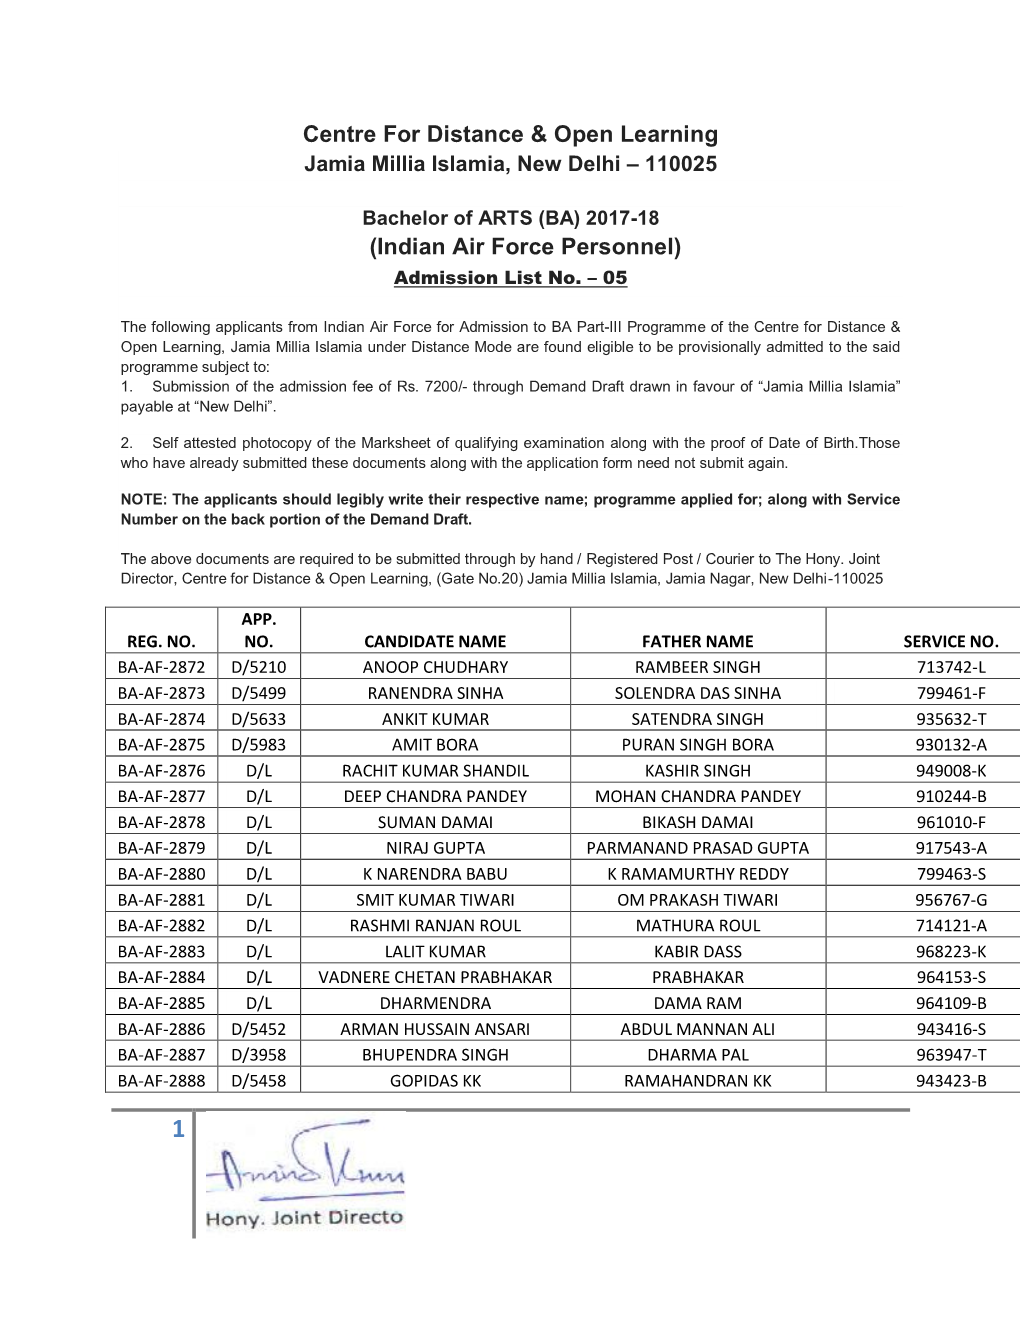 Indian Air Force Personnel) Admission List No